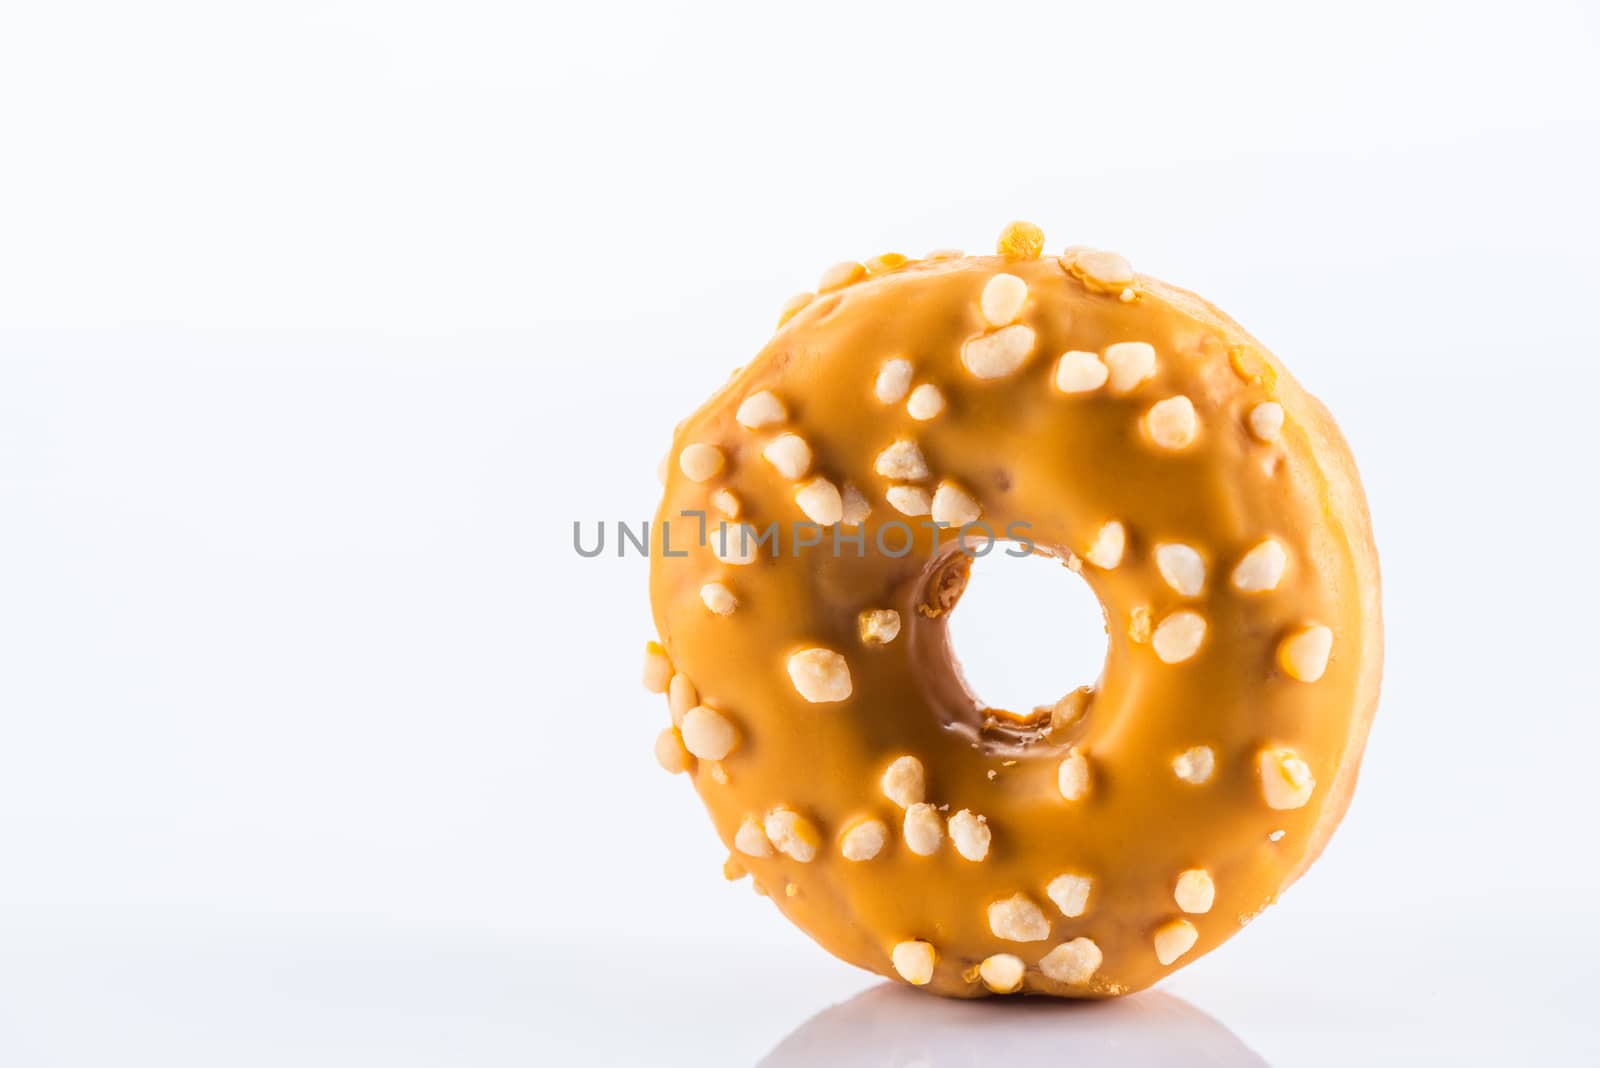 Single Salted Caramel Donut or Doughnut. Studio Photo on White Background, Close Up view.